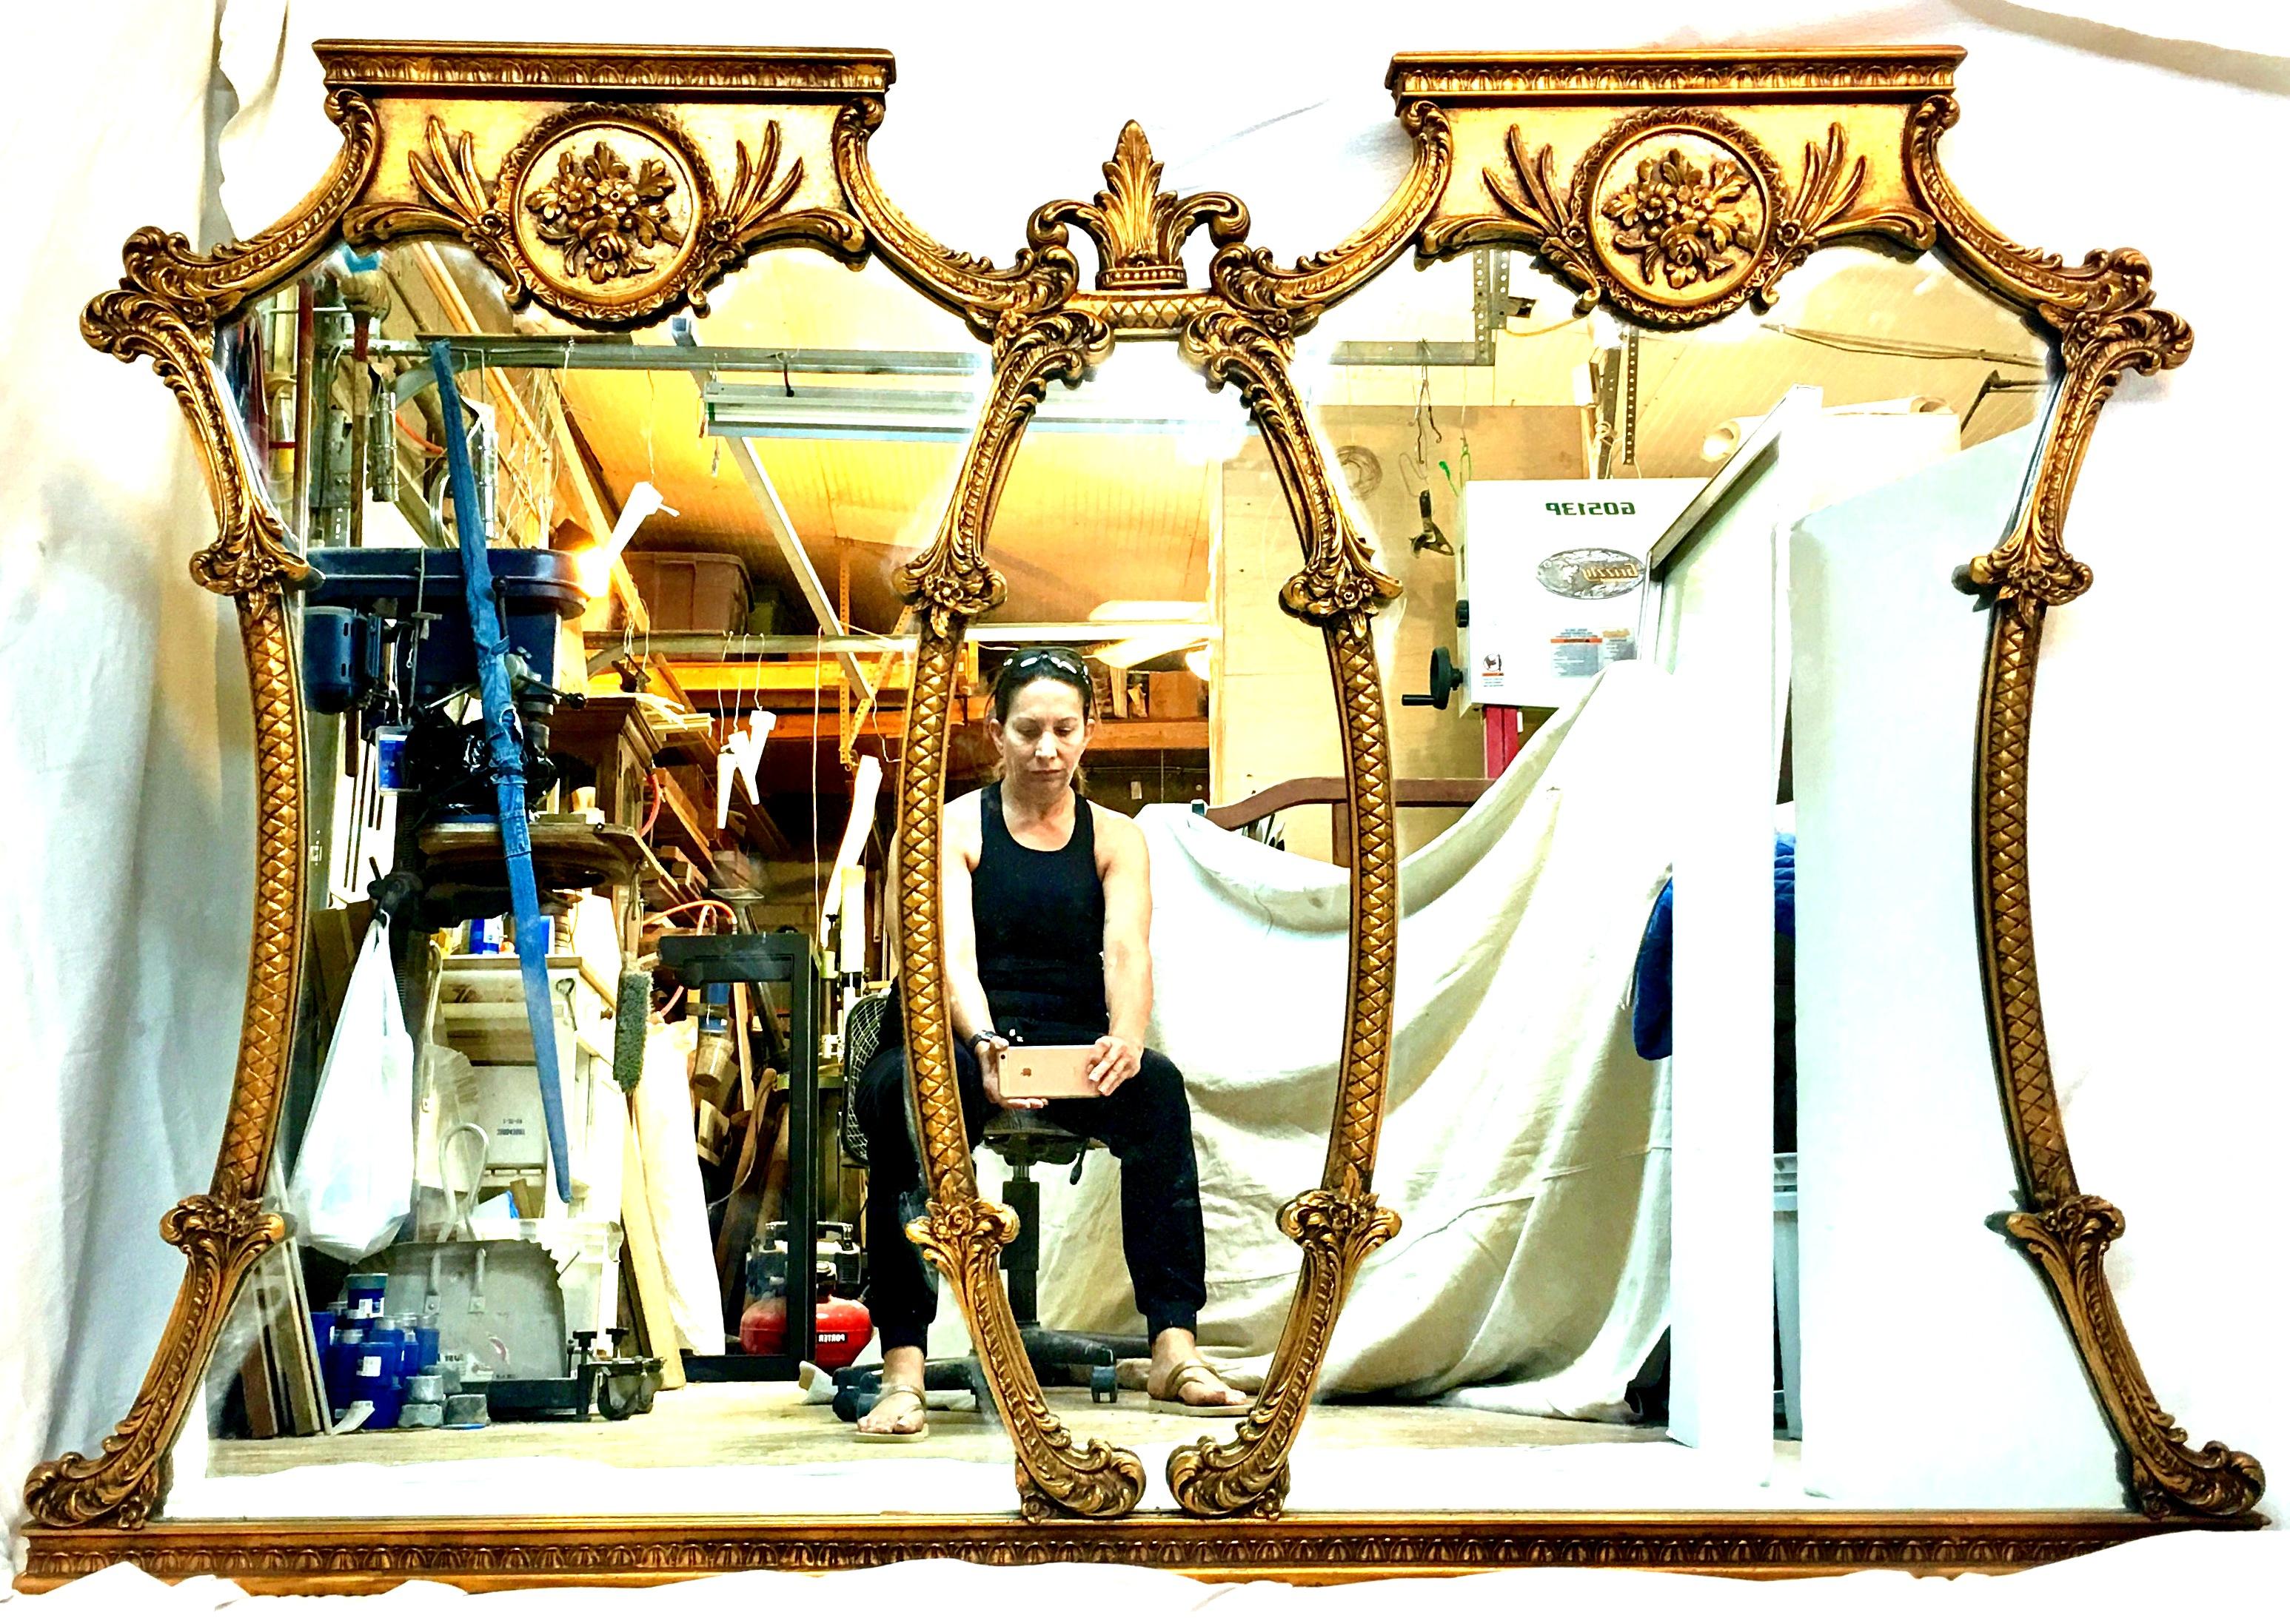 Mid-20th Century Monumental Stunning & Ornate French style carved gilt wood triptych large wall mirror. Measuring at 5.5 feet in length, this large three section hand carved gilt wood mirror 
features a classic and timeless floral, acanthus leaf and